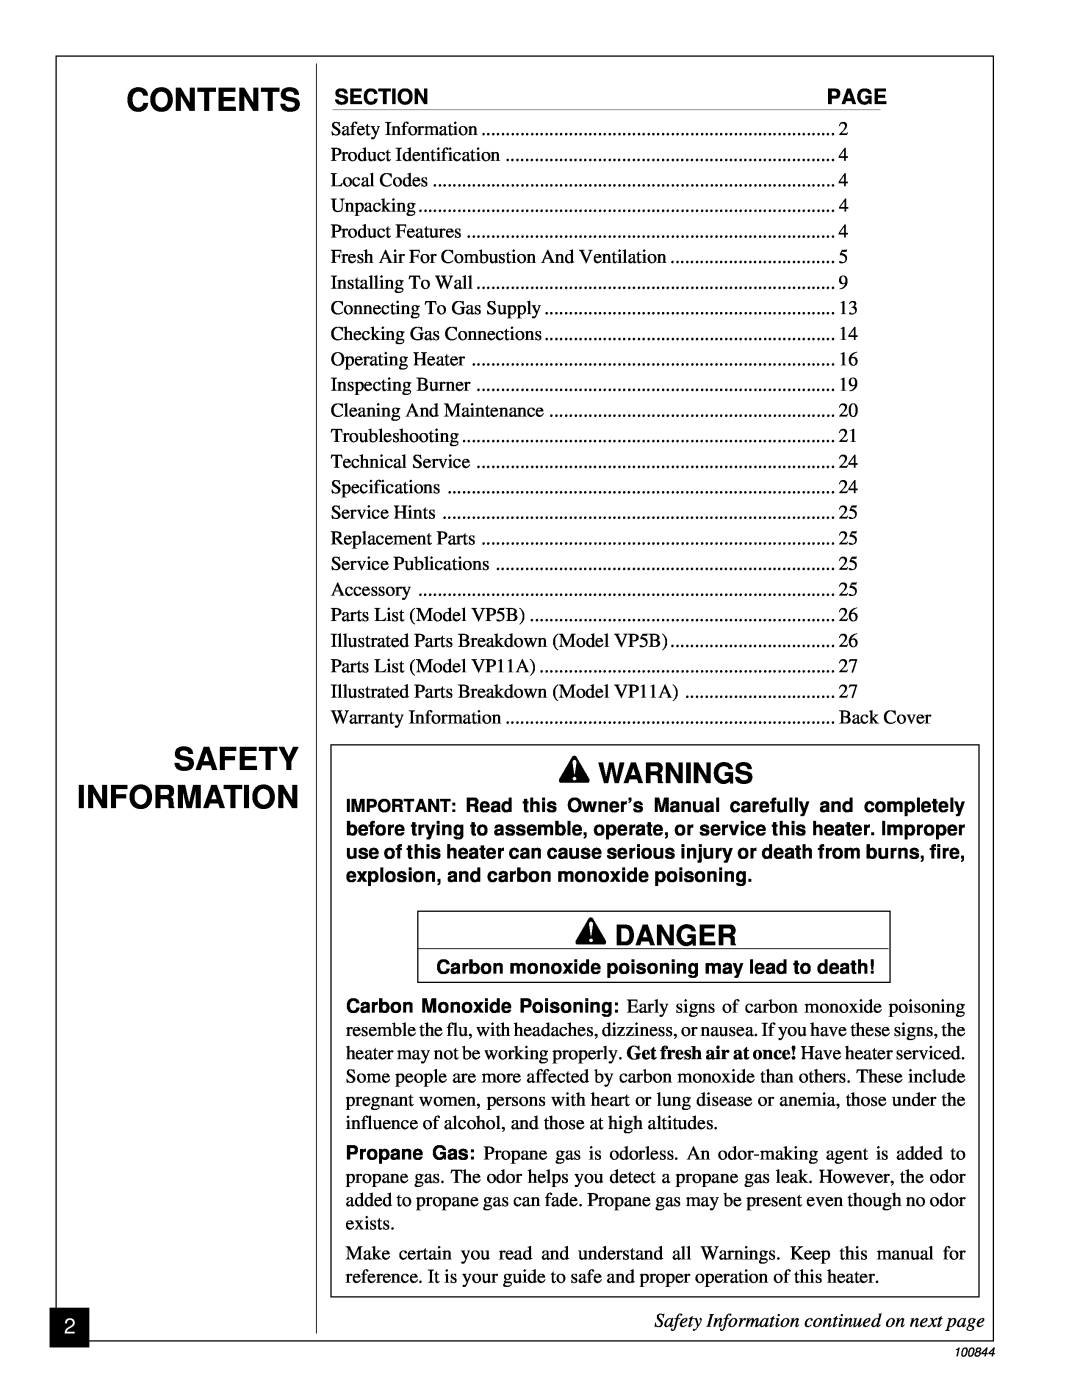 Desa VP5B, VP11A Contents Safety Information, Warnings, Danger, Safety Information continued on next page 